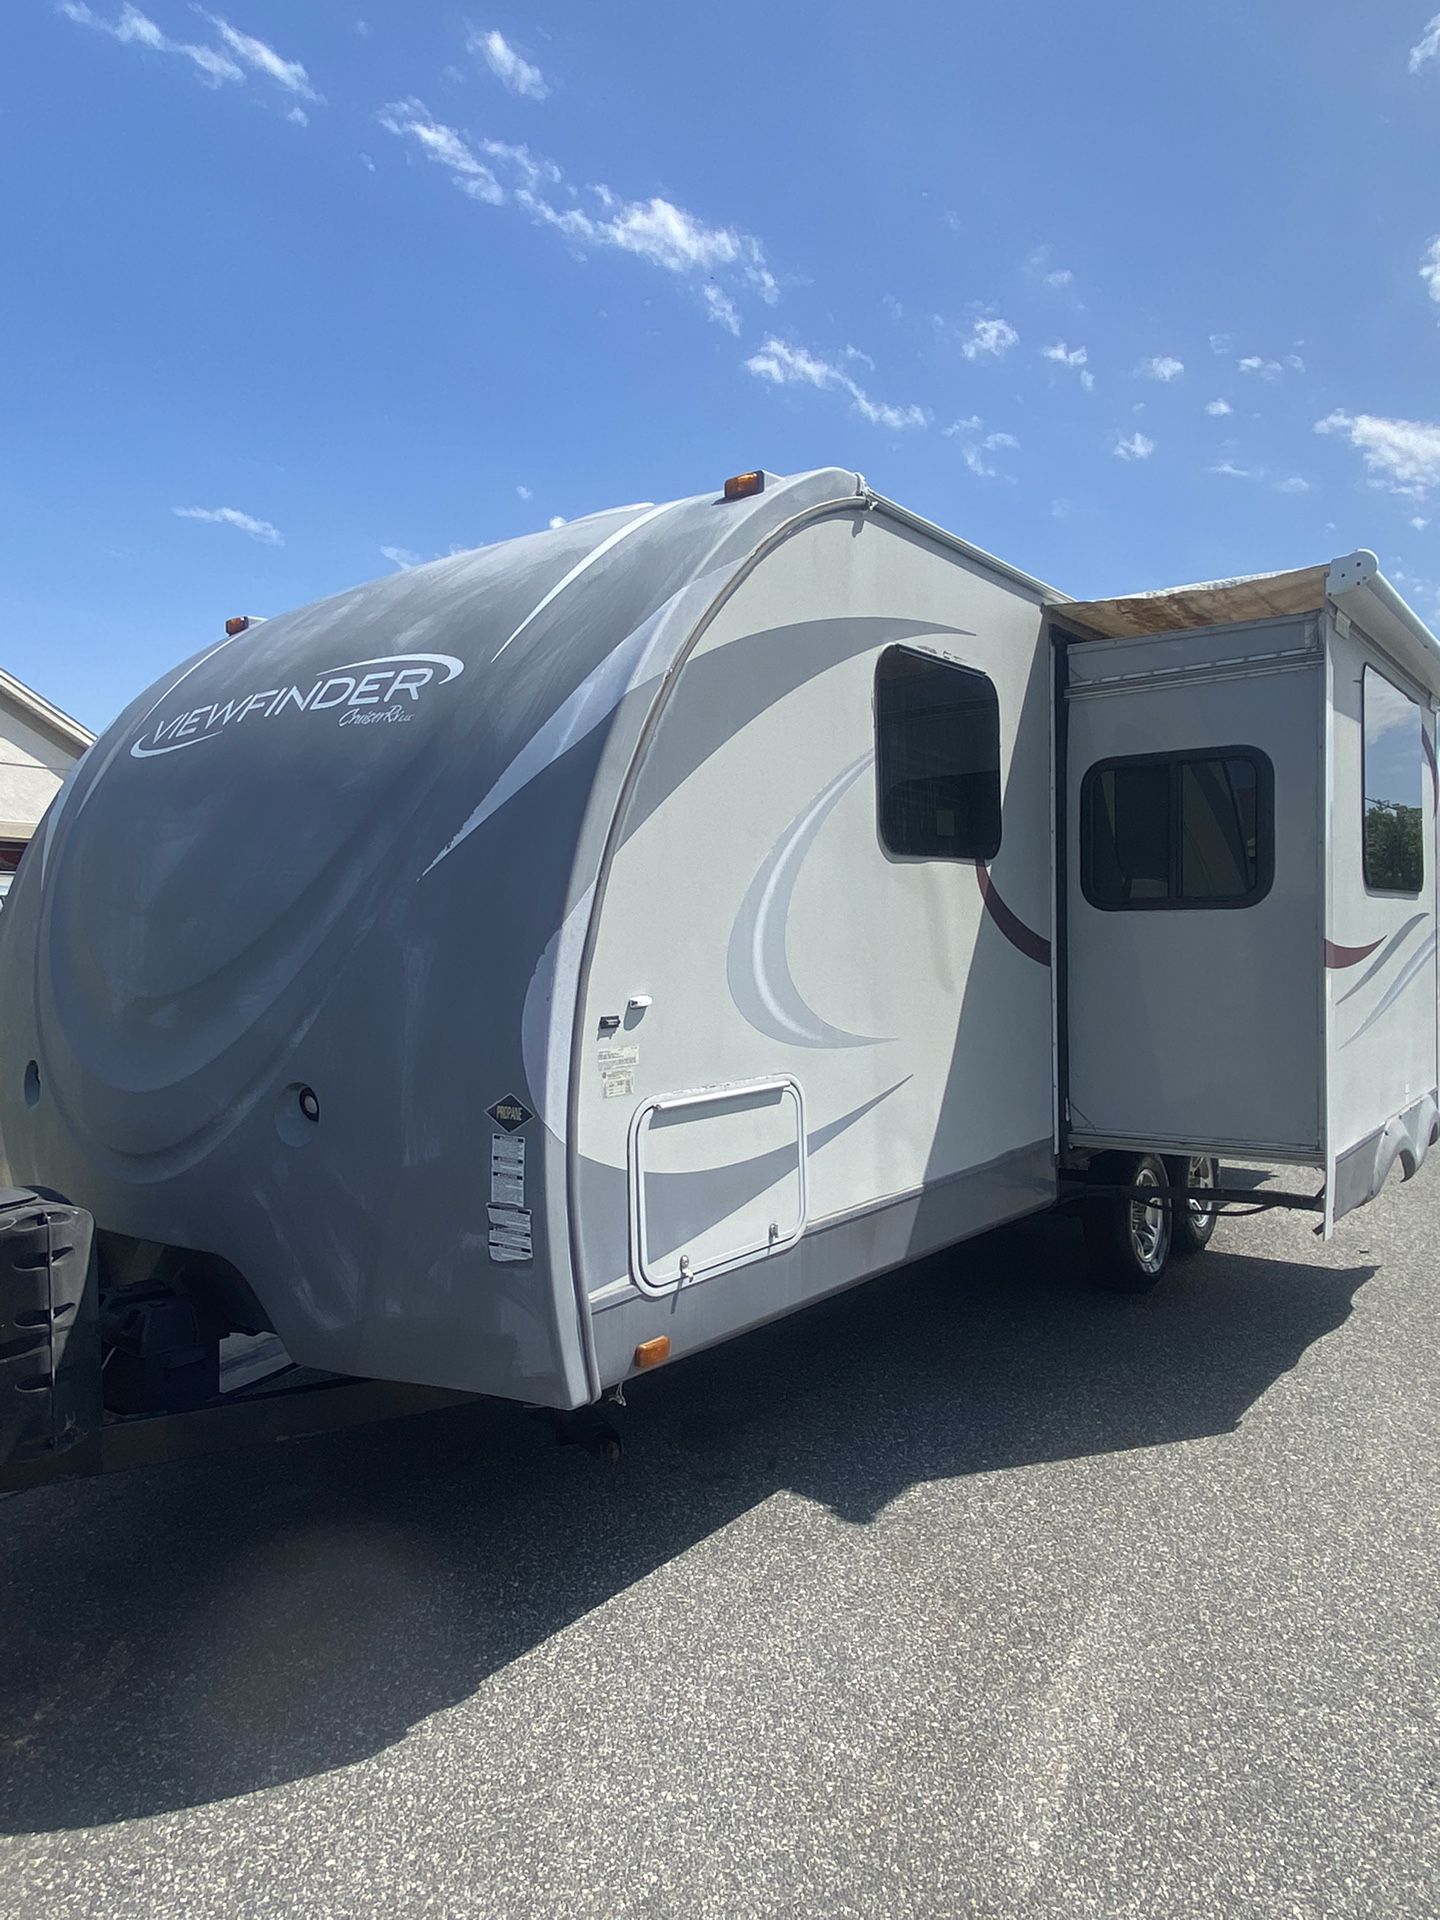 2011 Travel Trailer 22 Foot With Slide Out